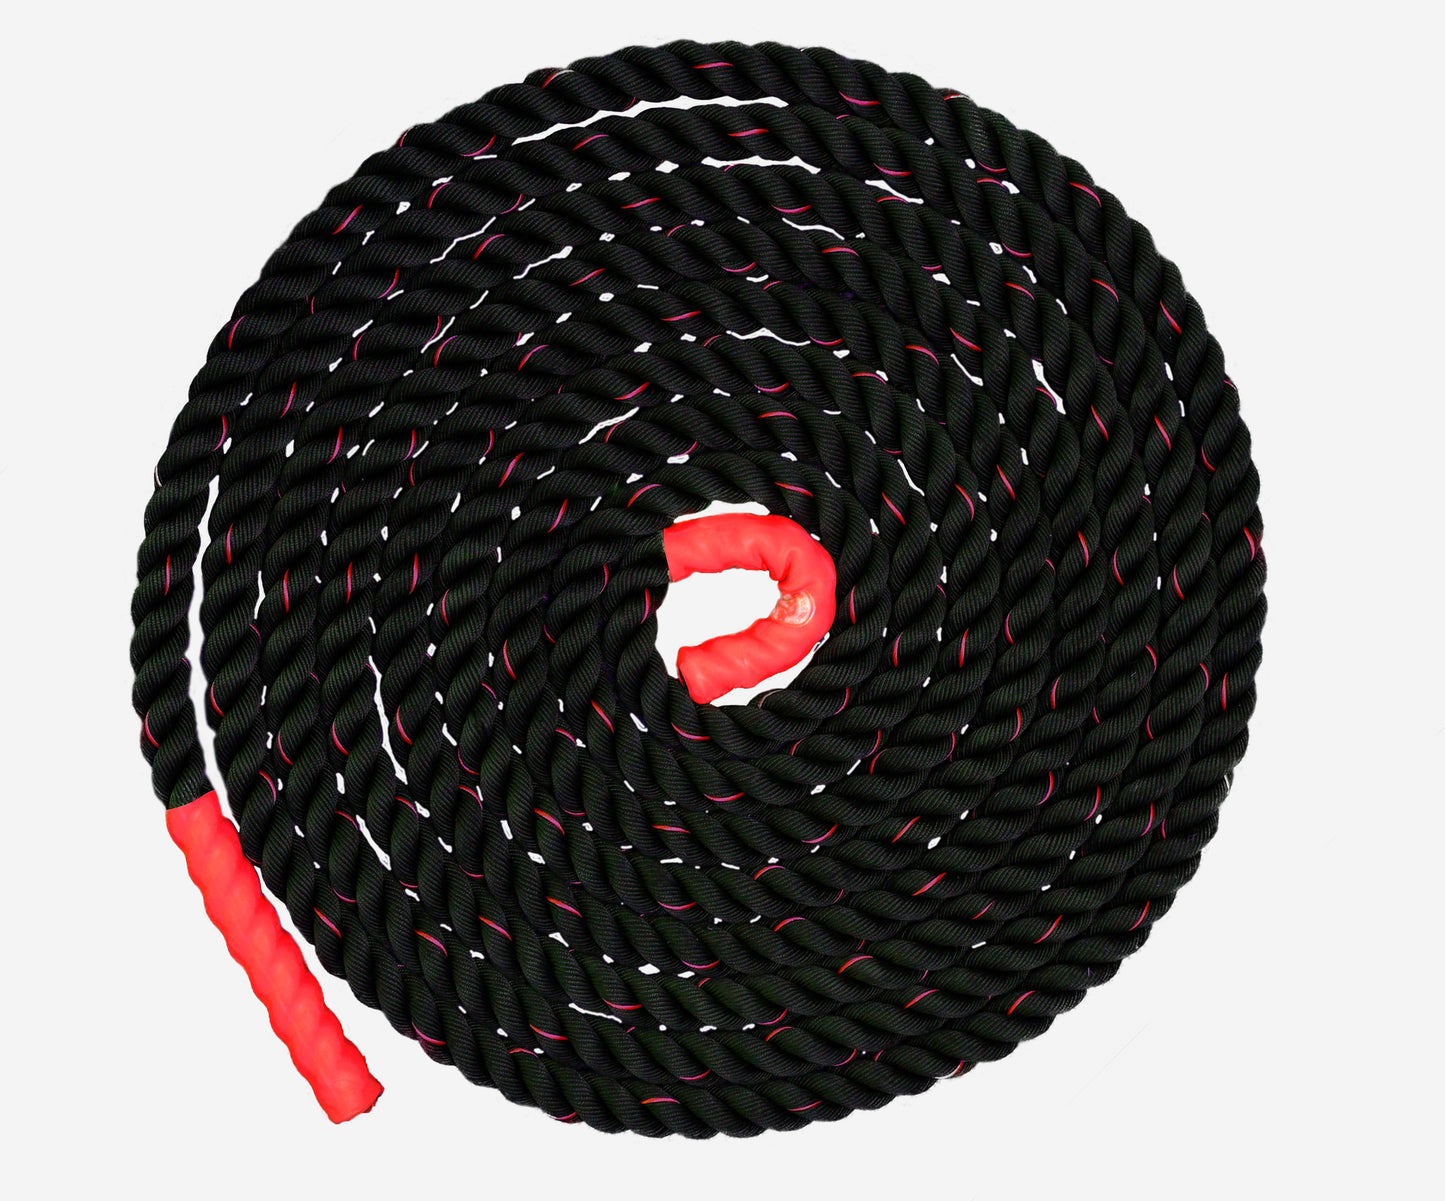 Battle Ropes Exercise Rope | Heavy Battle Rope for Crossfit Equipment | Fitness Training Gym Rope| 40 ft x 1.5 in - Red